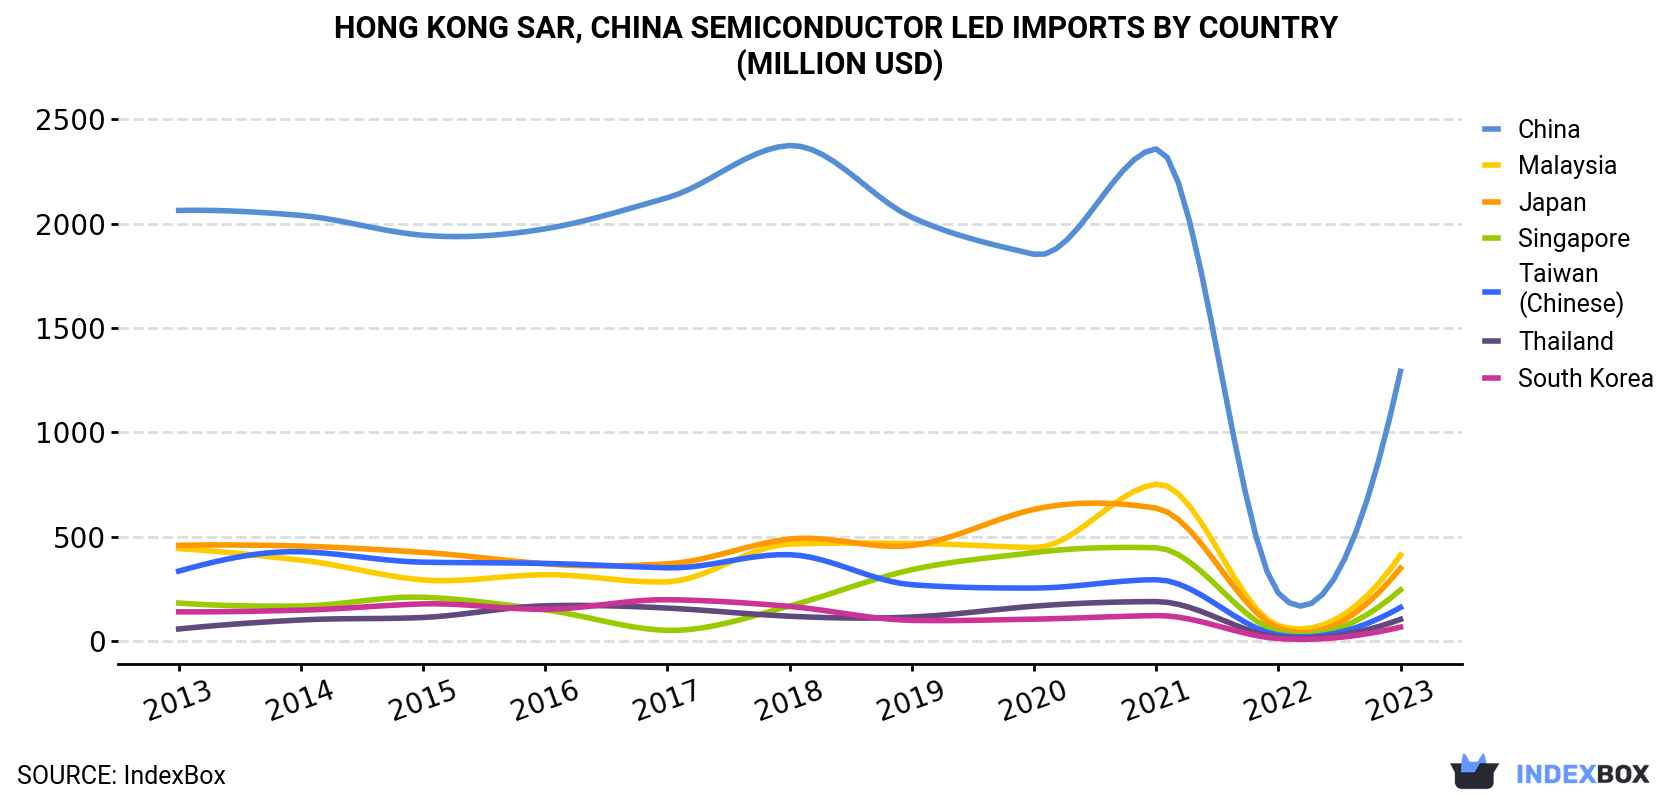 Hong Kong Semiconductor LED Imports By Country (Million USD)